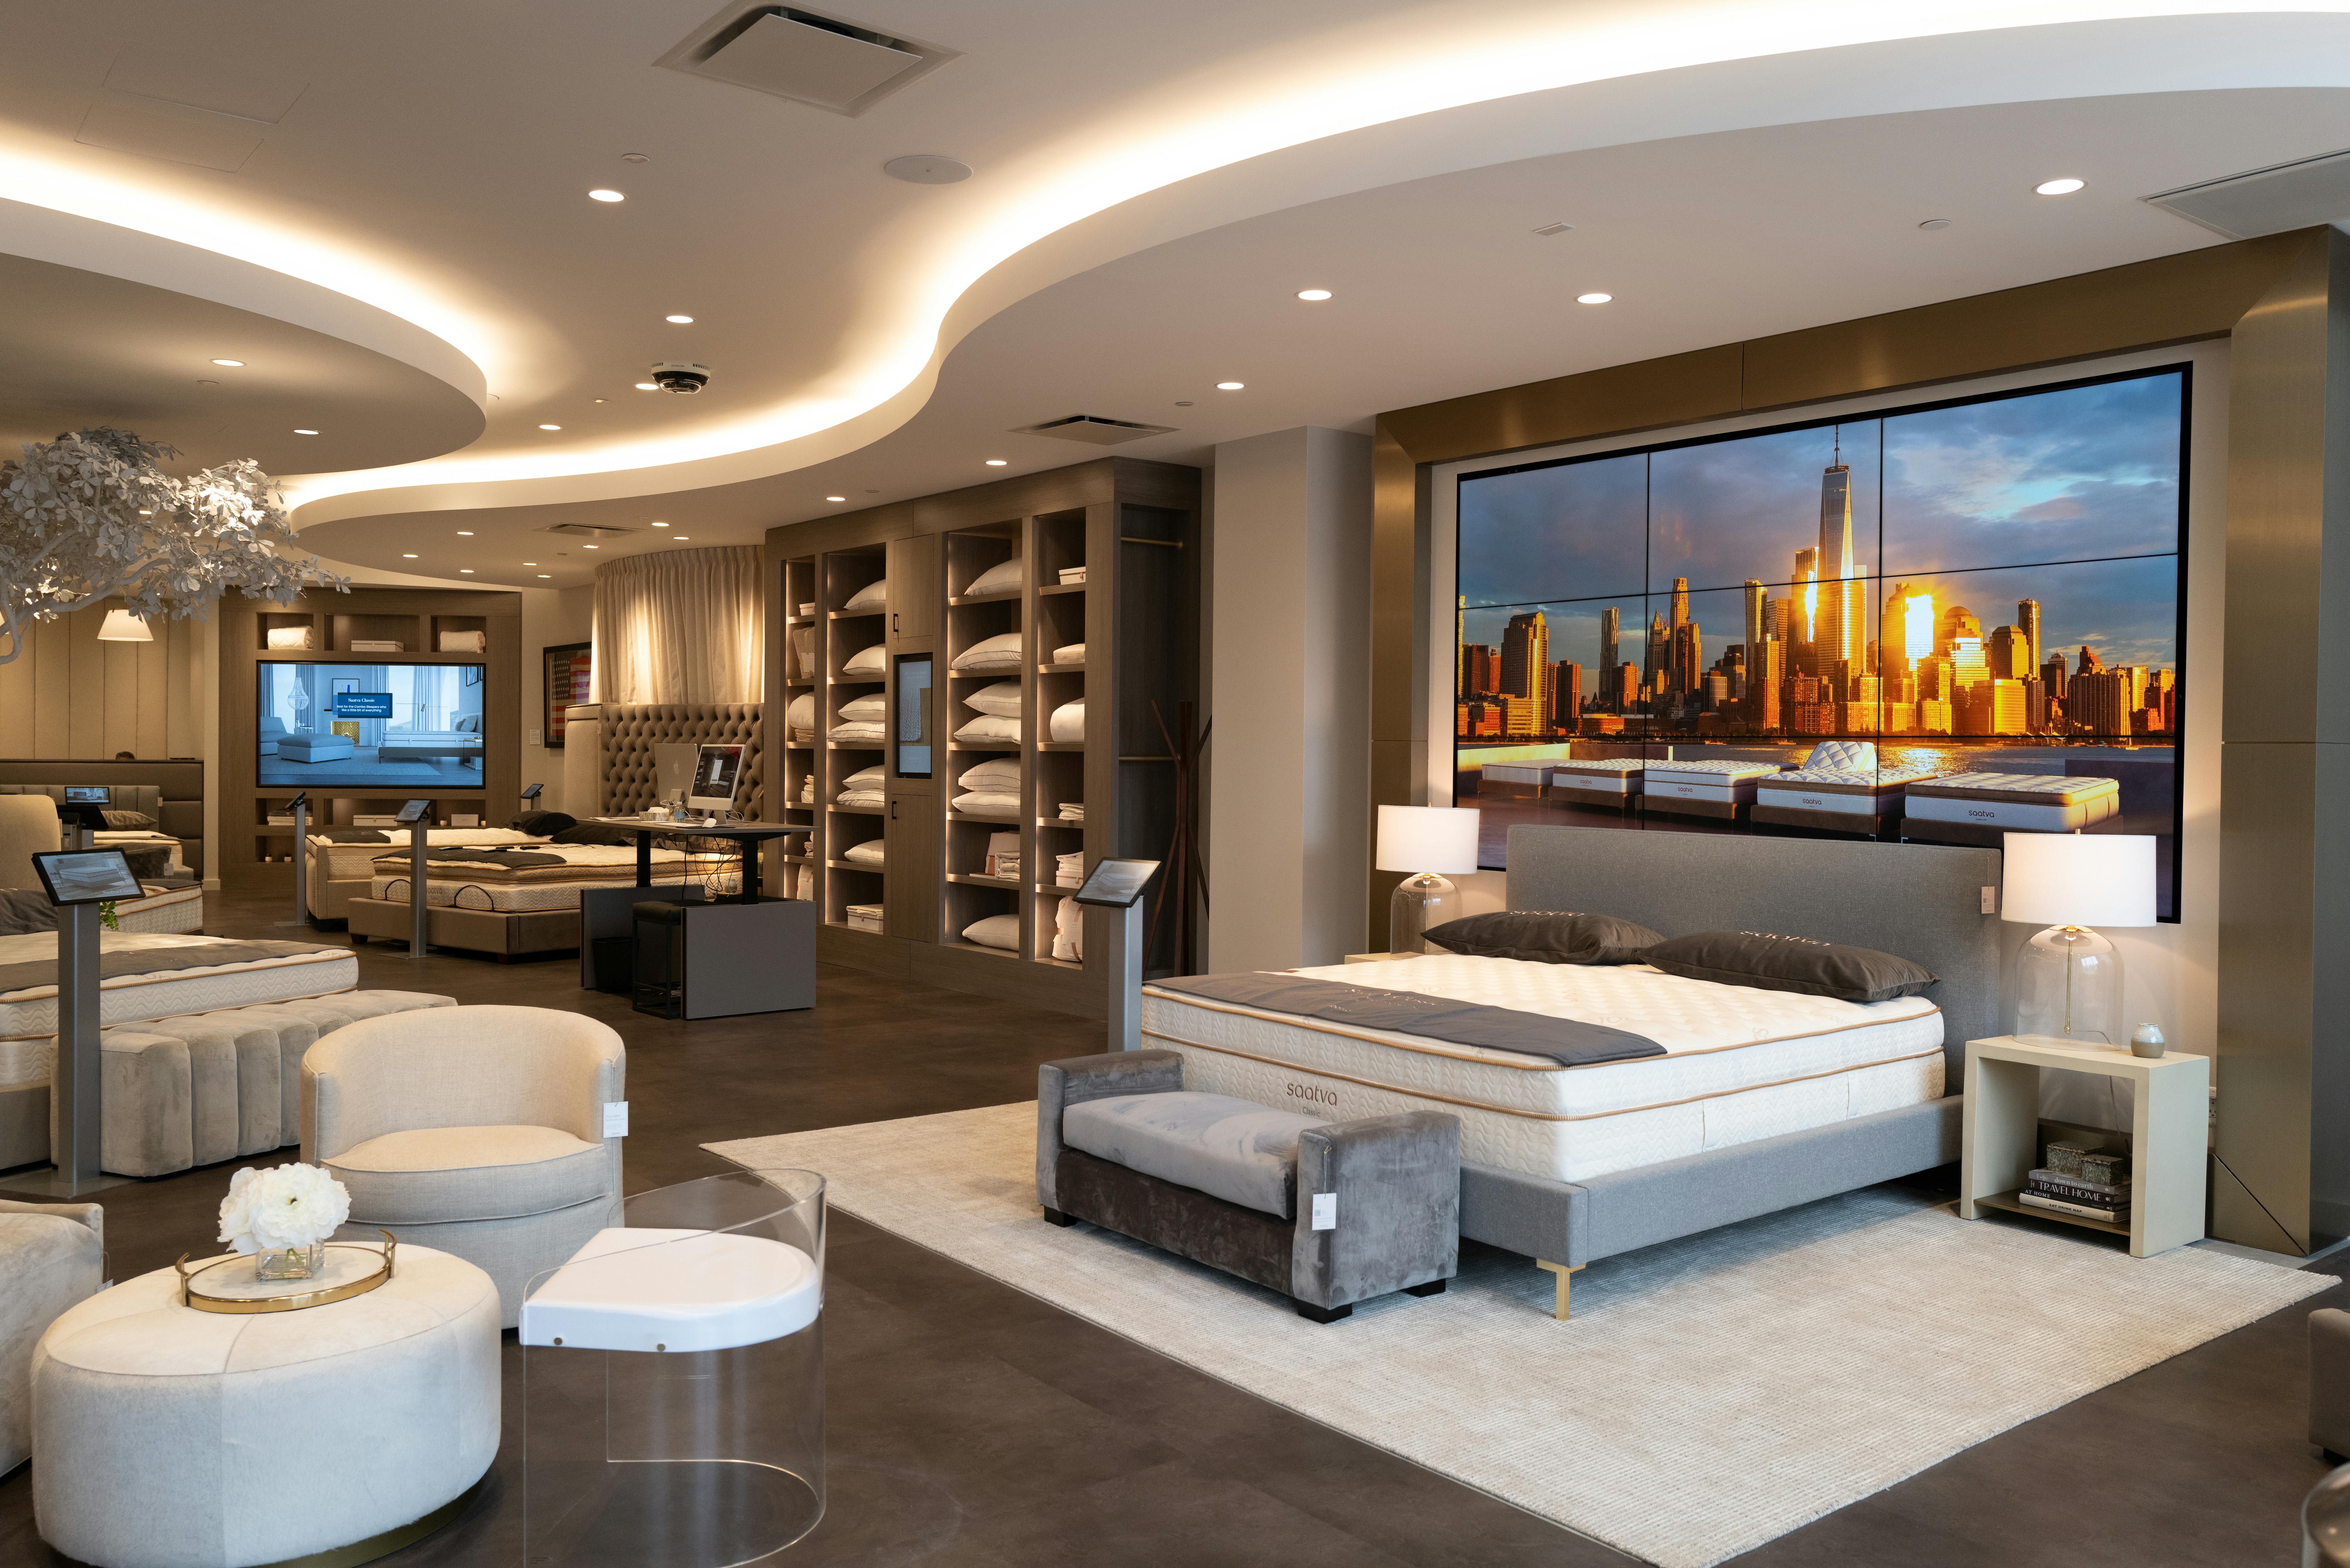 The elegant interior of the Saatva Manhasset retail location features a bed with a digital headboard, a self-checkout station with desktop computers for guests to transact at their leisure, a bedding and sleep accessories wall, and a seating area.